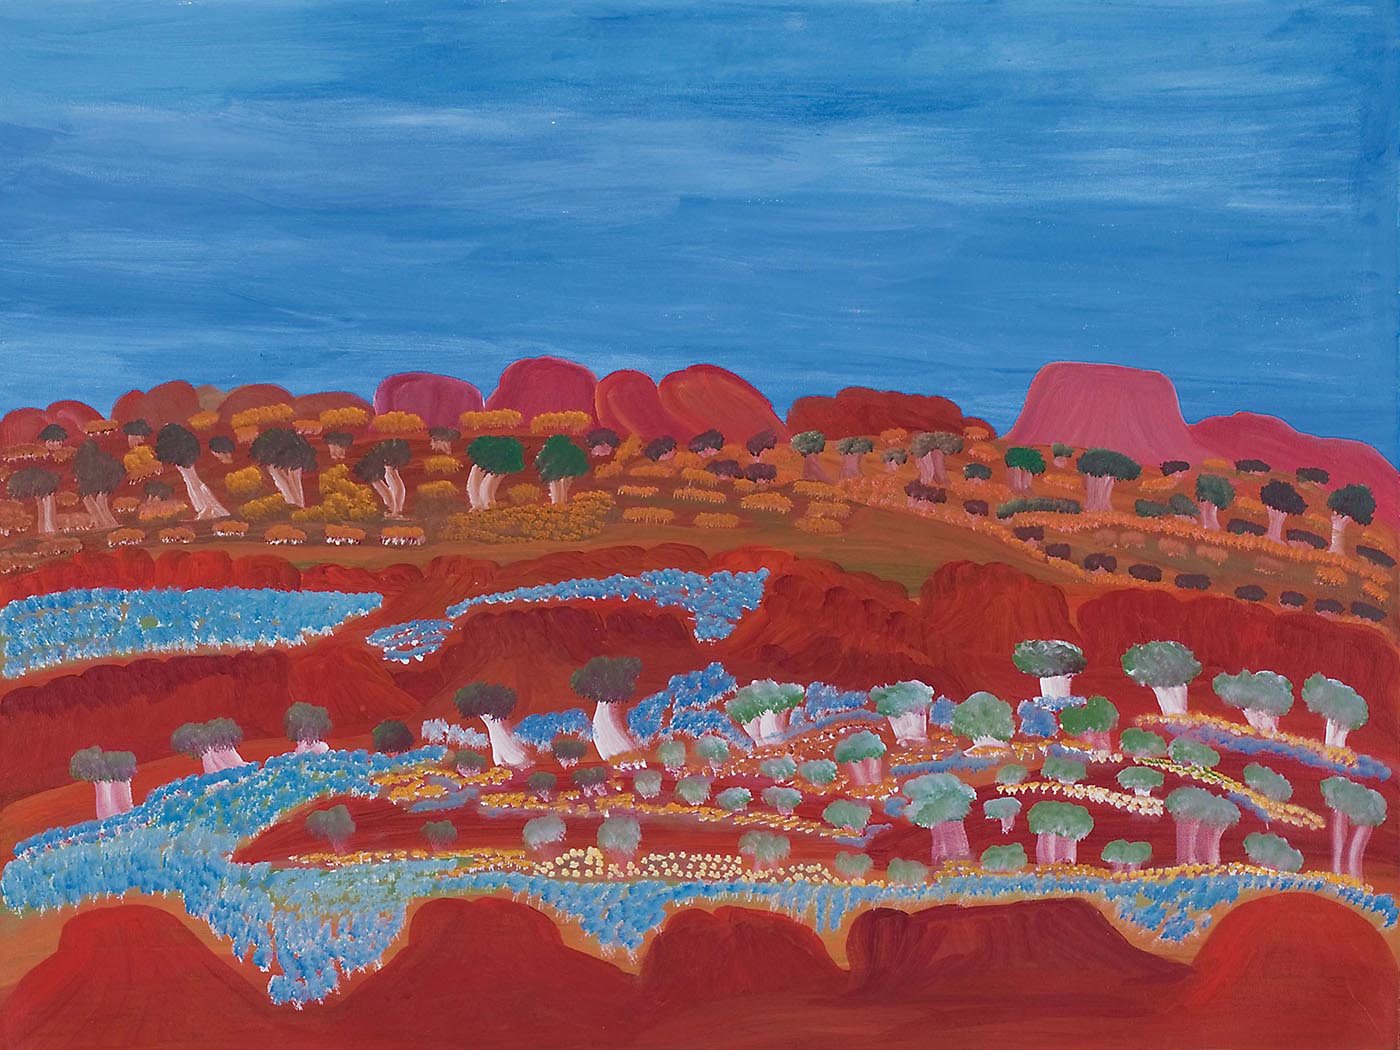 A painting on canvas with a range of orange-red rock formations lying low against a blue sky backdrop. In front of the formations are green and light brown trees and yellow-brown grass-like foliage. In the foreground are two horizontal rows of orange-red rock formations creating a valley-like appearance. The valley and some of the rock formations are covered in expanses of flowers in blue, yellow and cream as well as trees in green and beige-white.